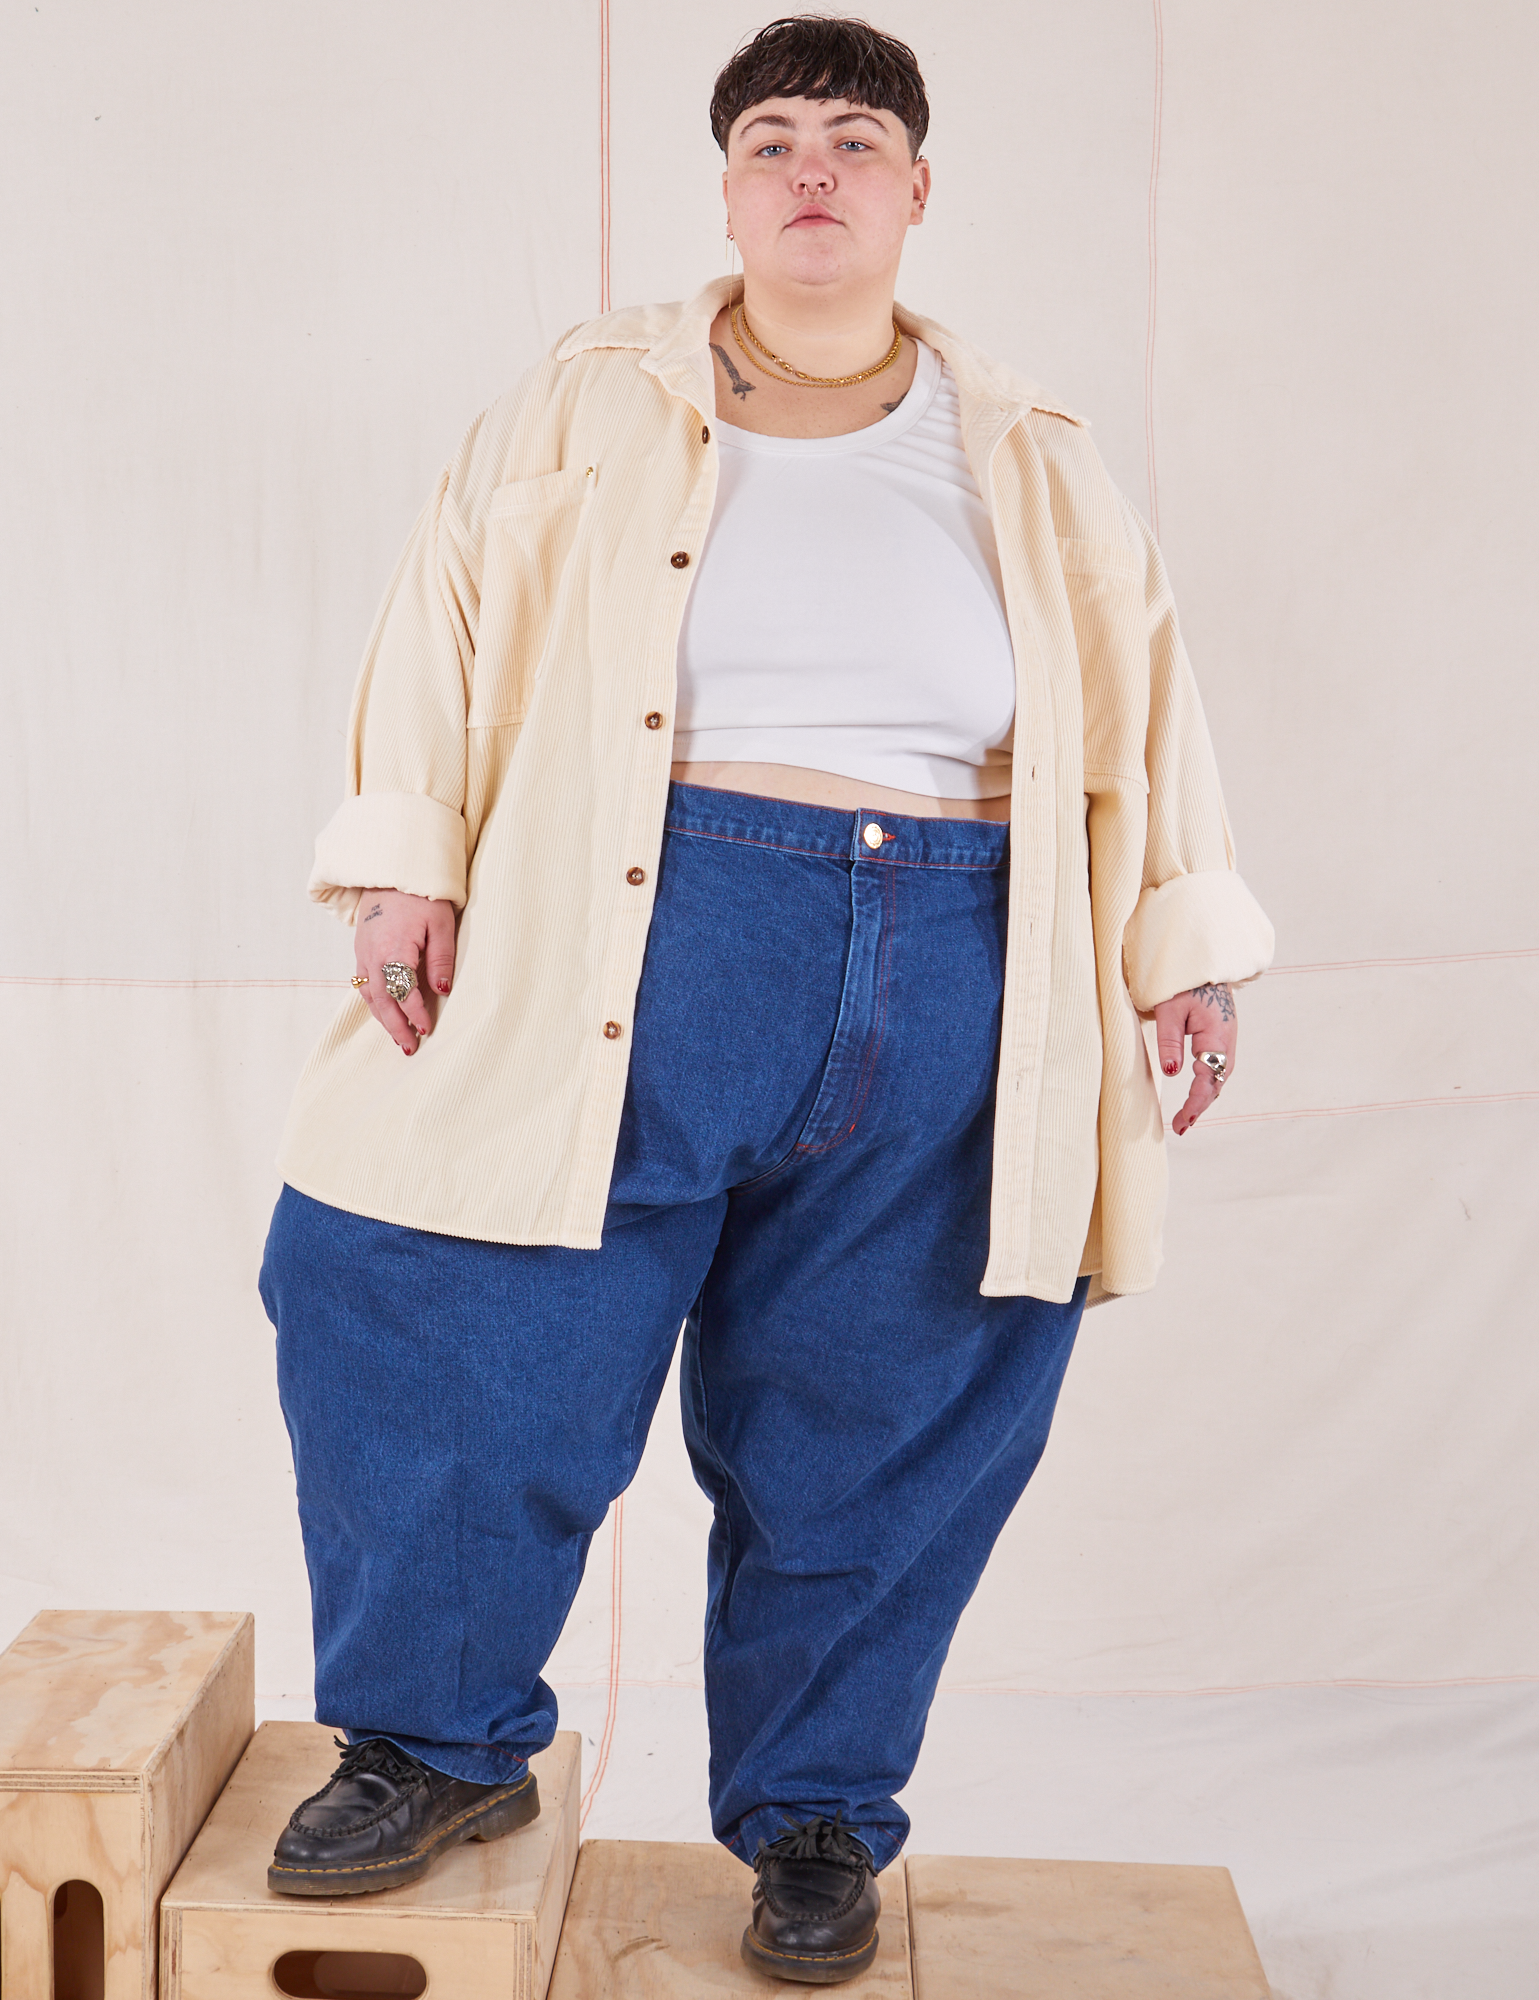 Jordan is wearing Corduroy Overshirt in Vintage Off-White with a vintage off-white Cropped Tank Top underneath and dark wash Denim Trouser Jeans